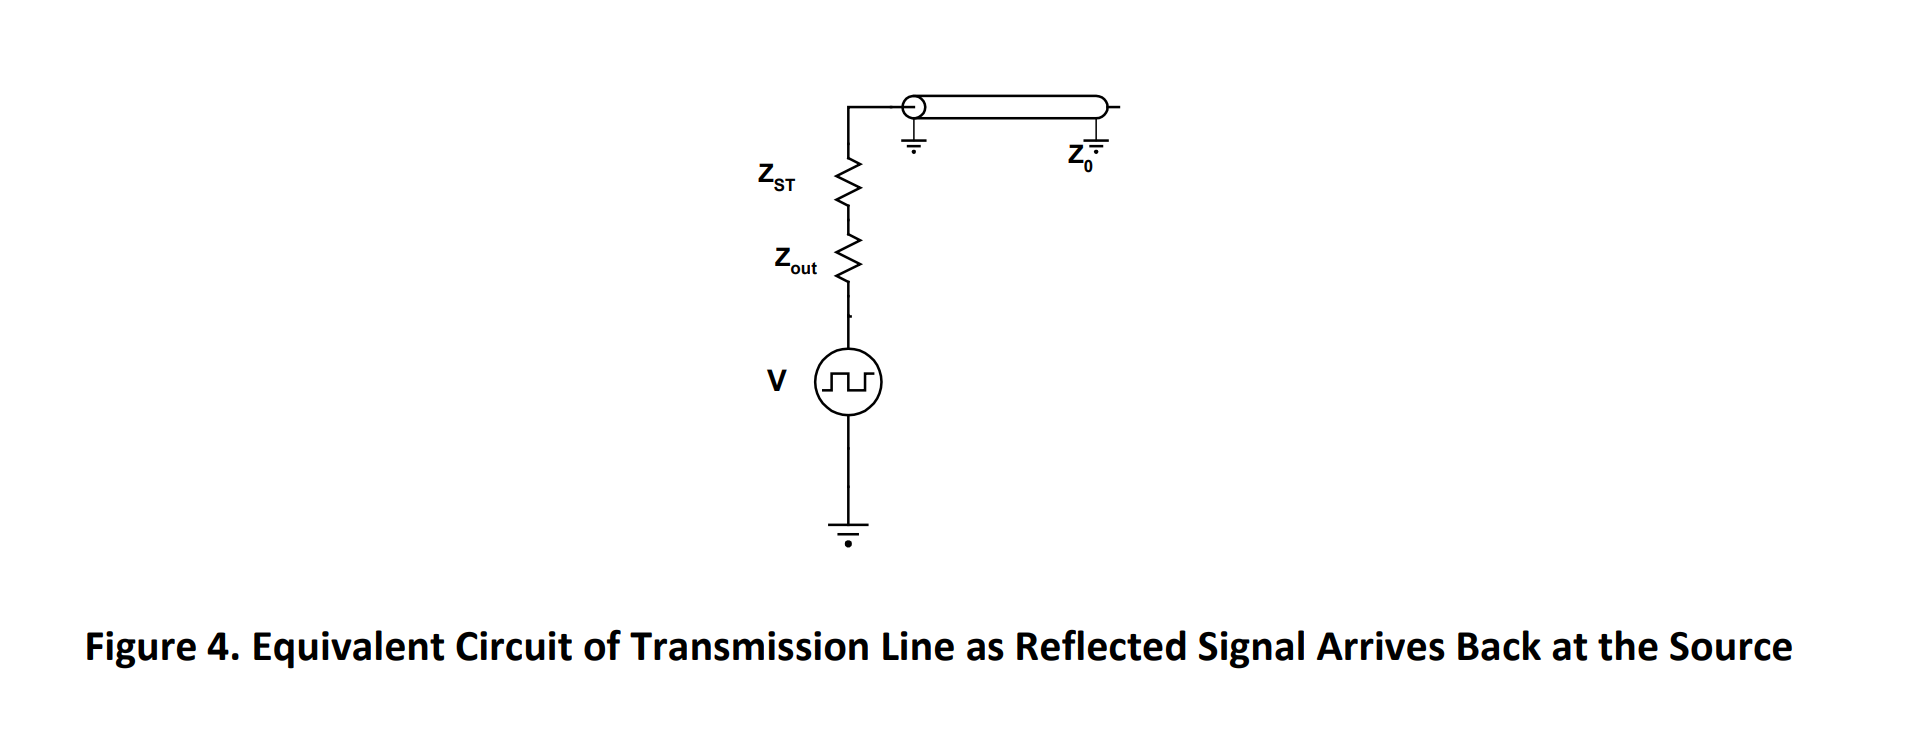 Figure 4. The signal voltage source with two impedance resistors in series to the start of the transmission line form the equivalent circuit seen by the reflected signal